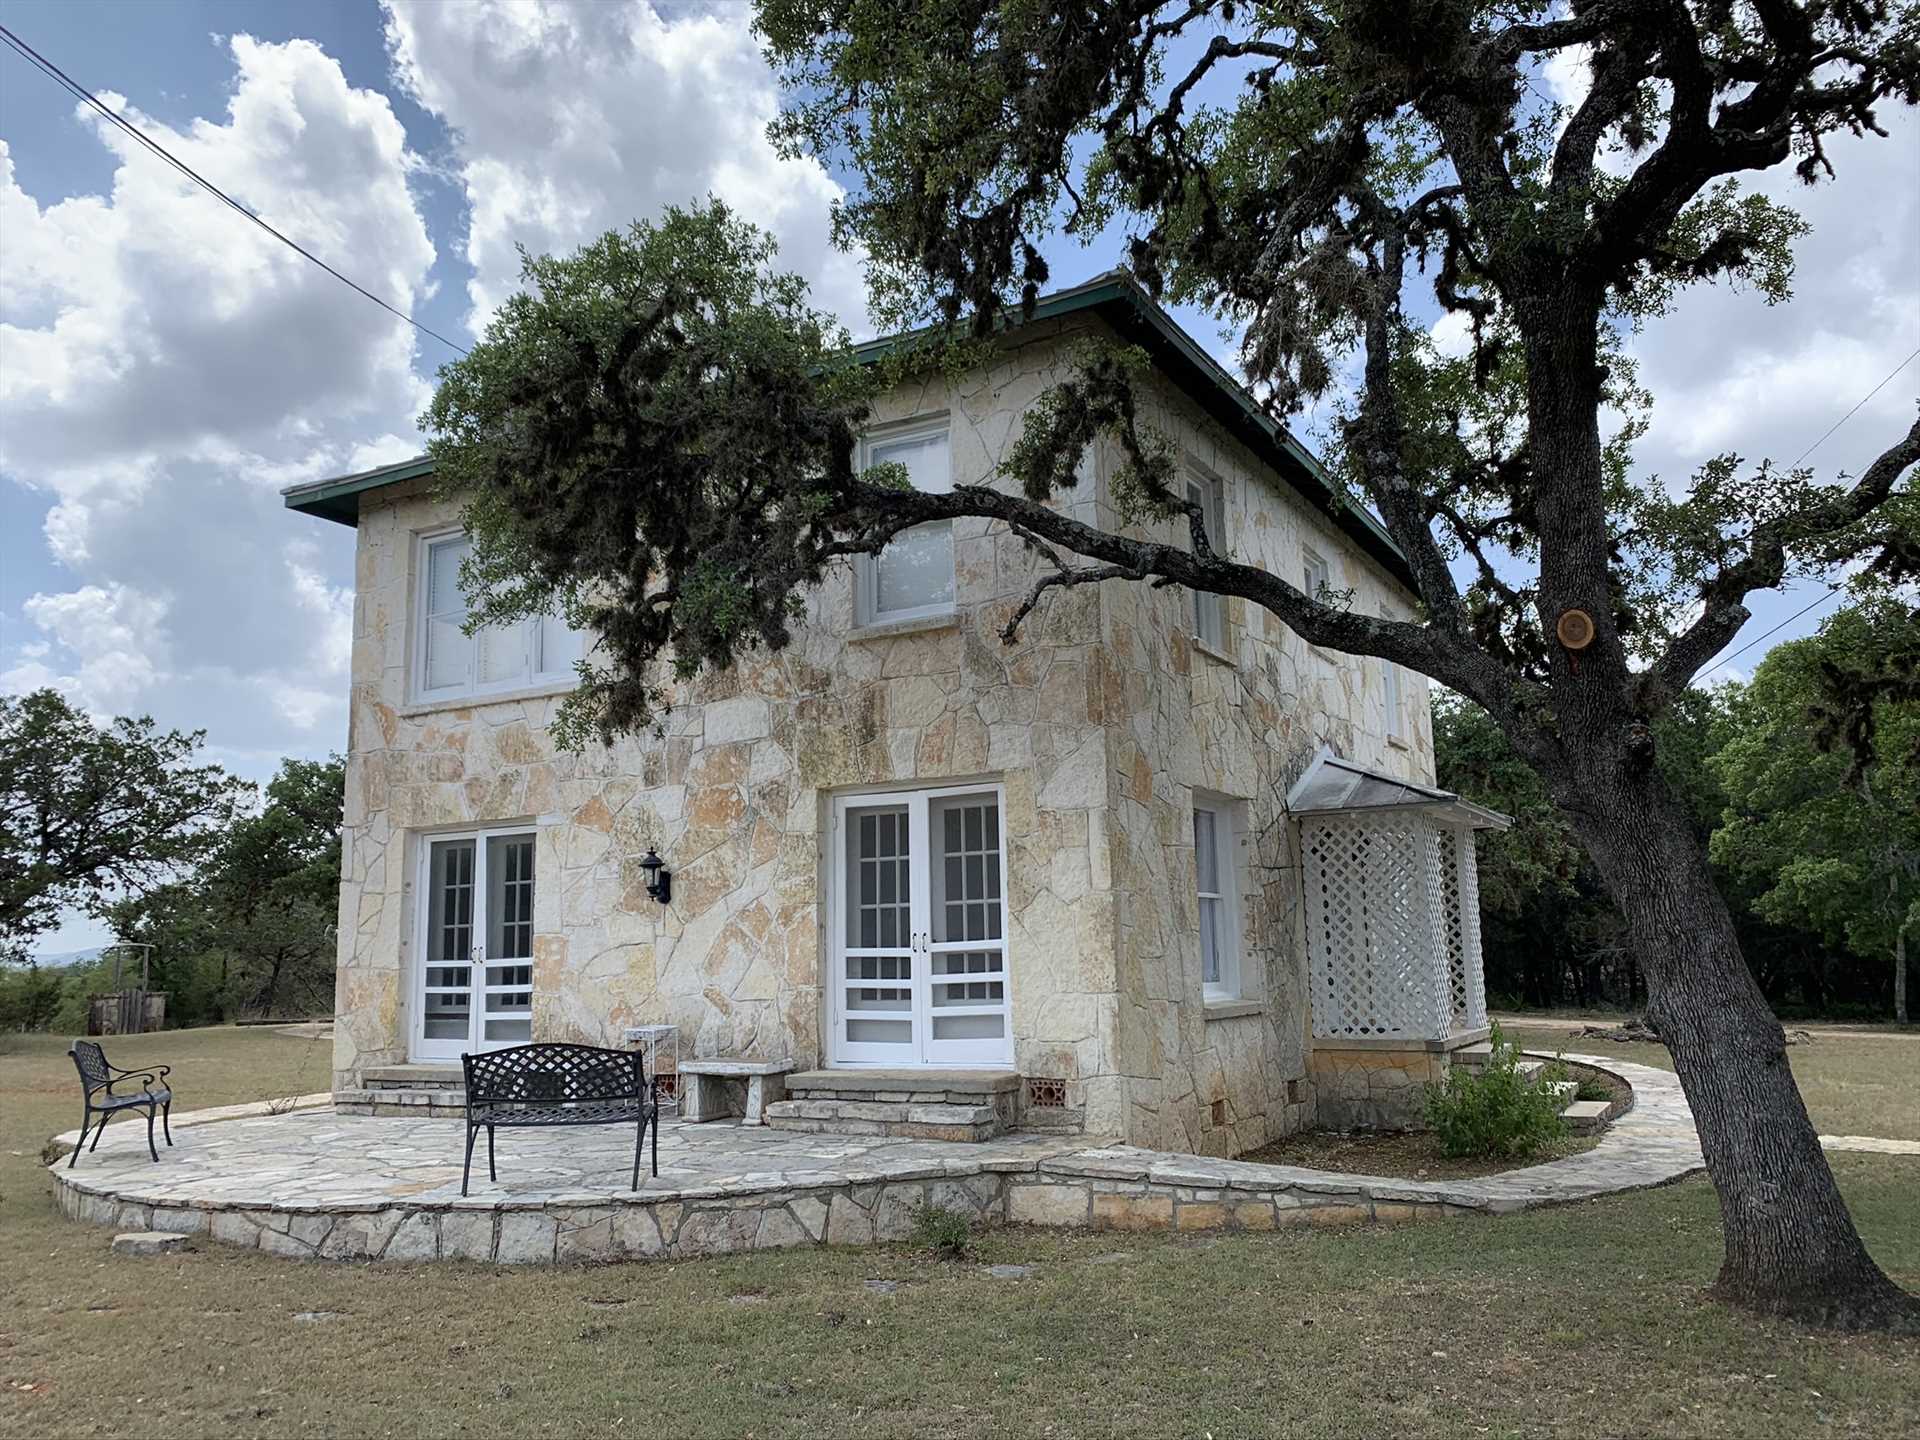                                                 This riverside palace was built in the 1930s, and built to last! It's been modernized to provide a fun and memorable Hill Country getaway for your family and friends.